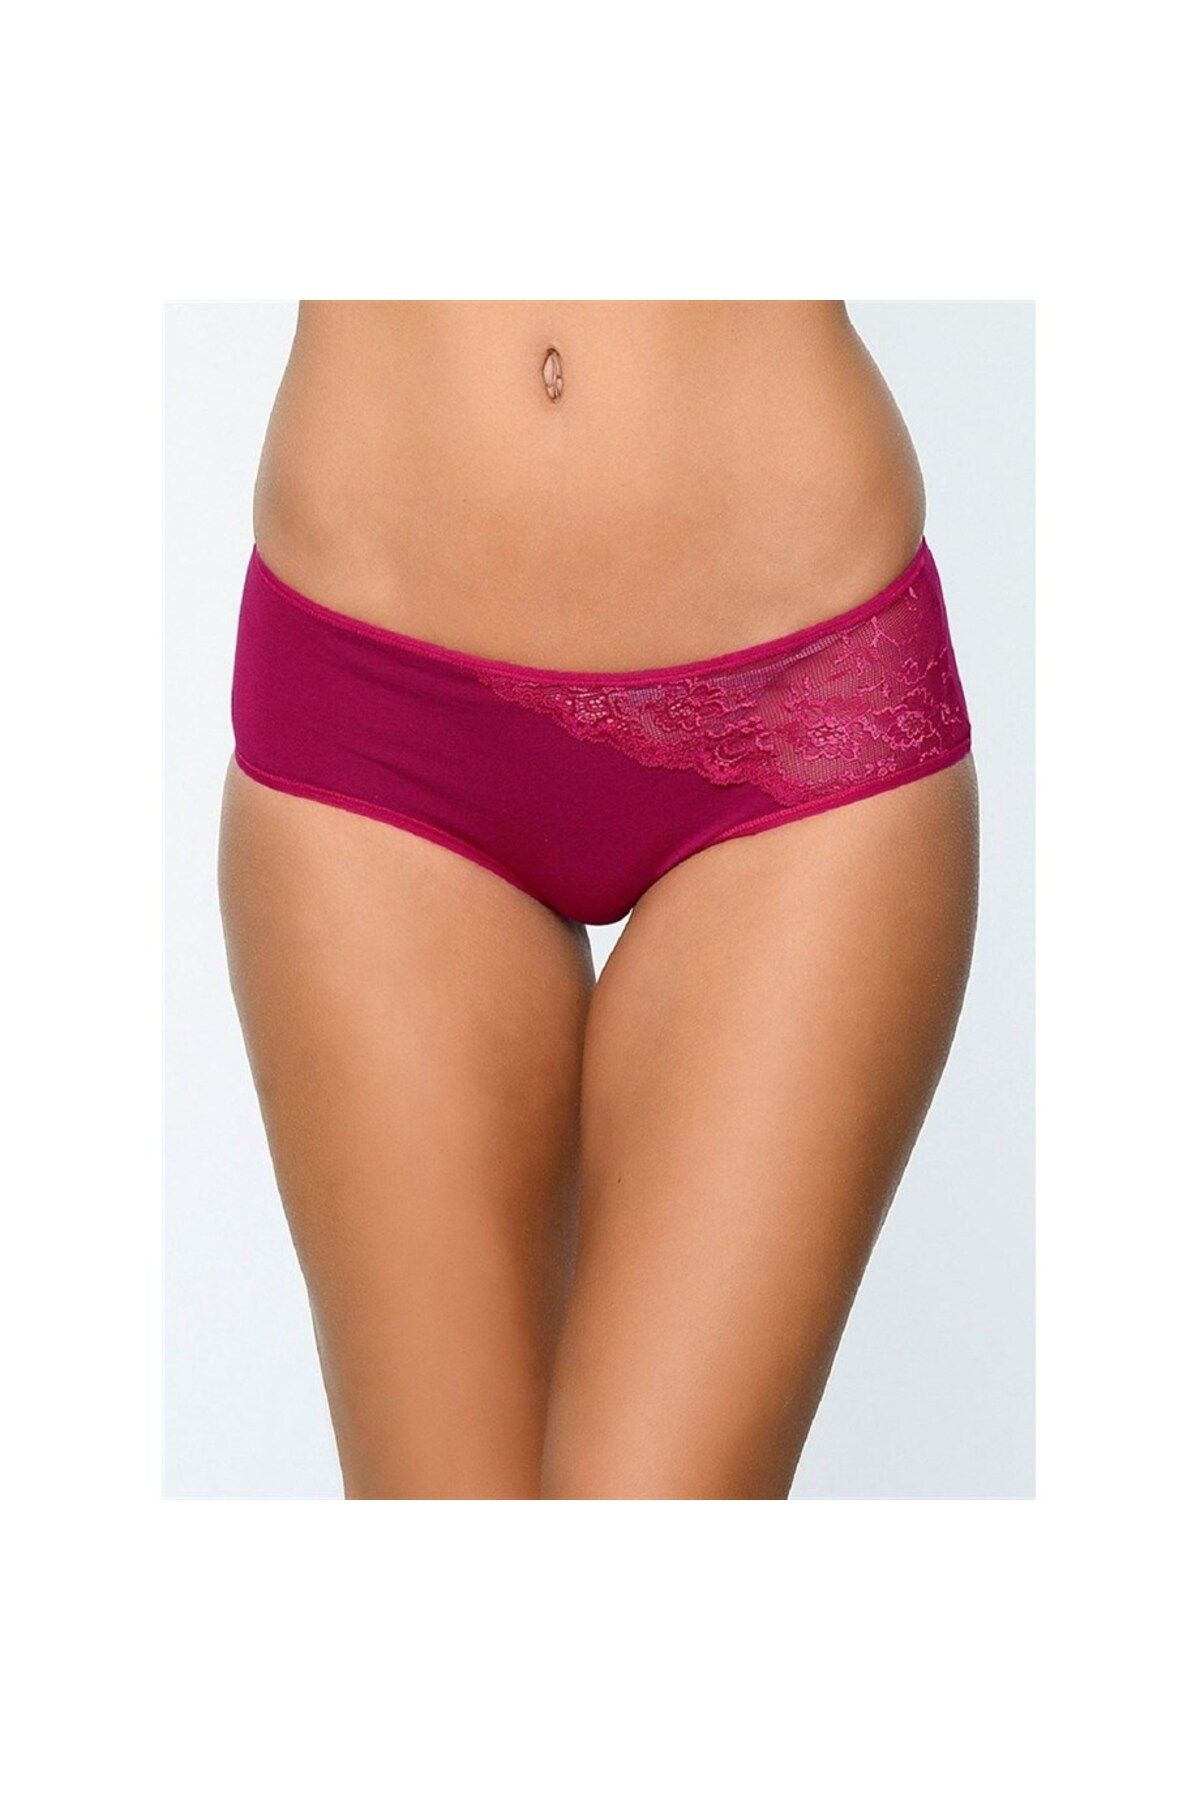 Magic Form 467 Cotton Lace Normal Panties - Cherry - Trendyol